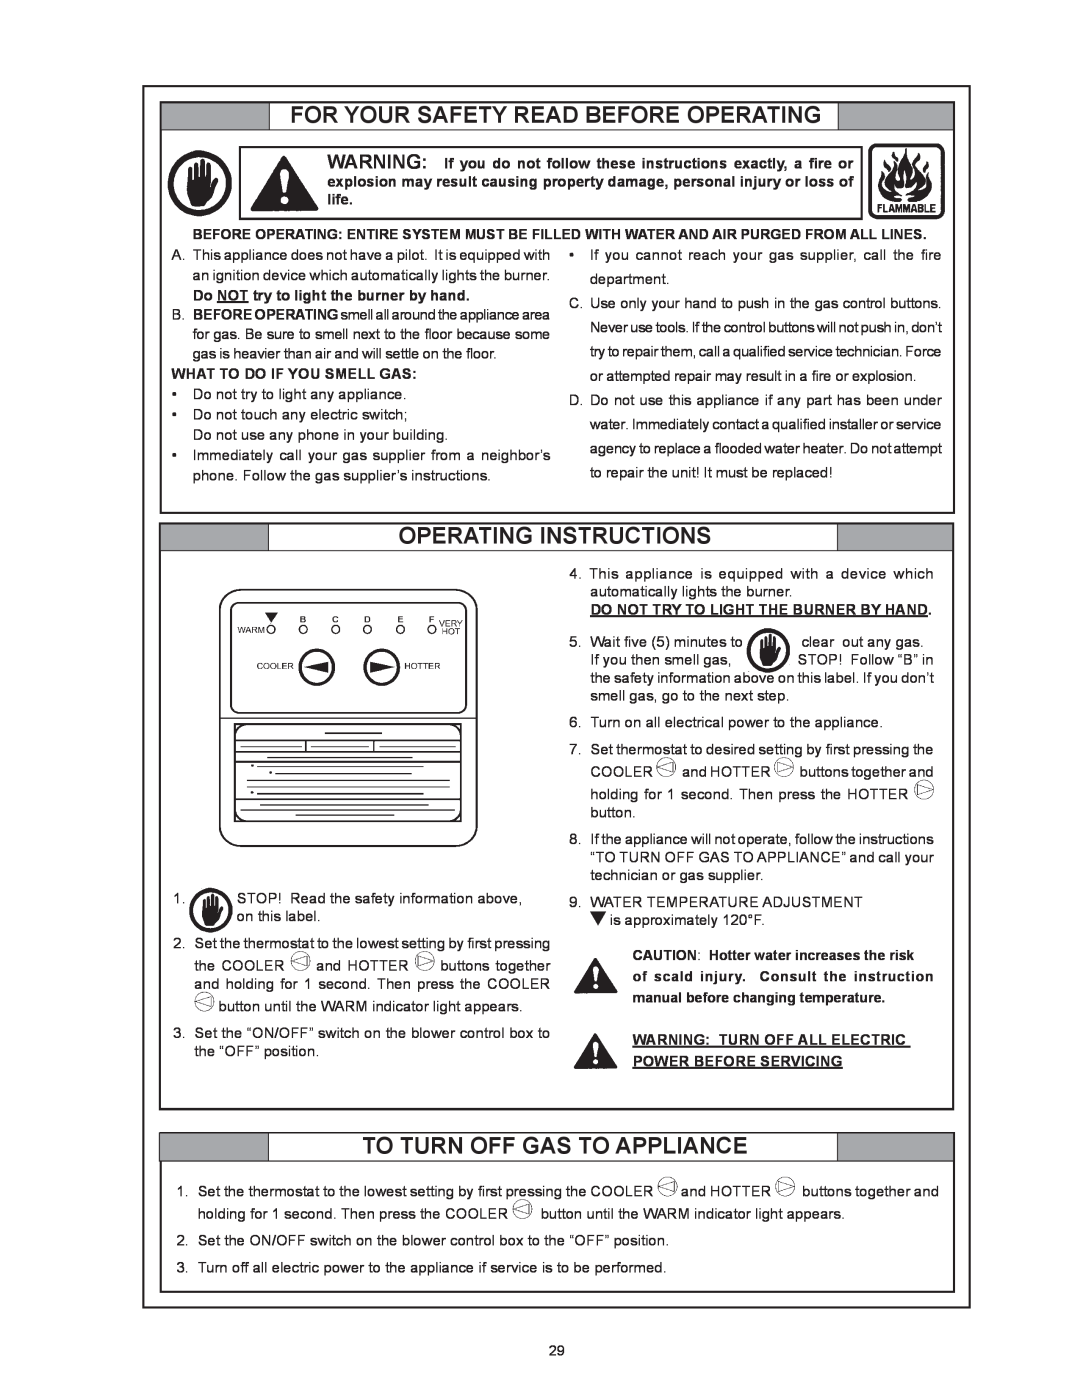 Reliance Water Heaters 317775-000 For Your Safety Read Before Operating, Operating Instructions, Power Before Servicing 